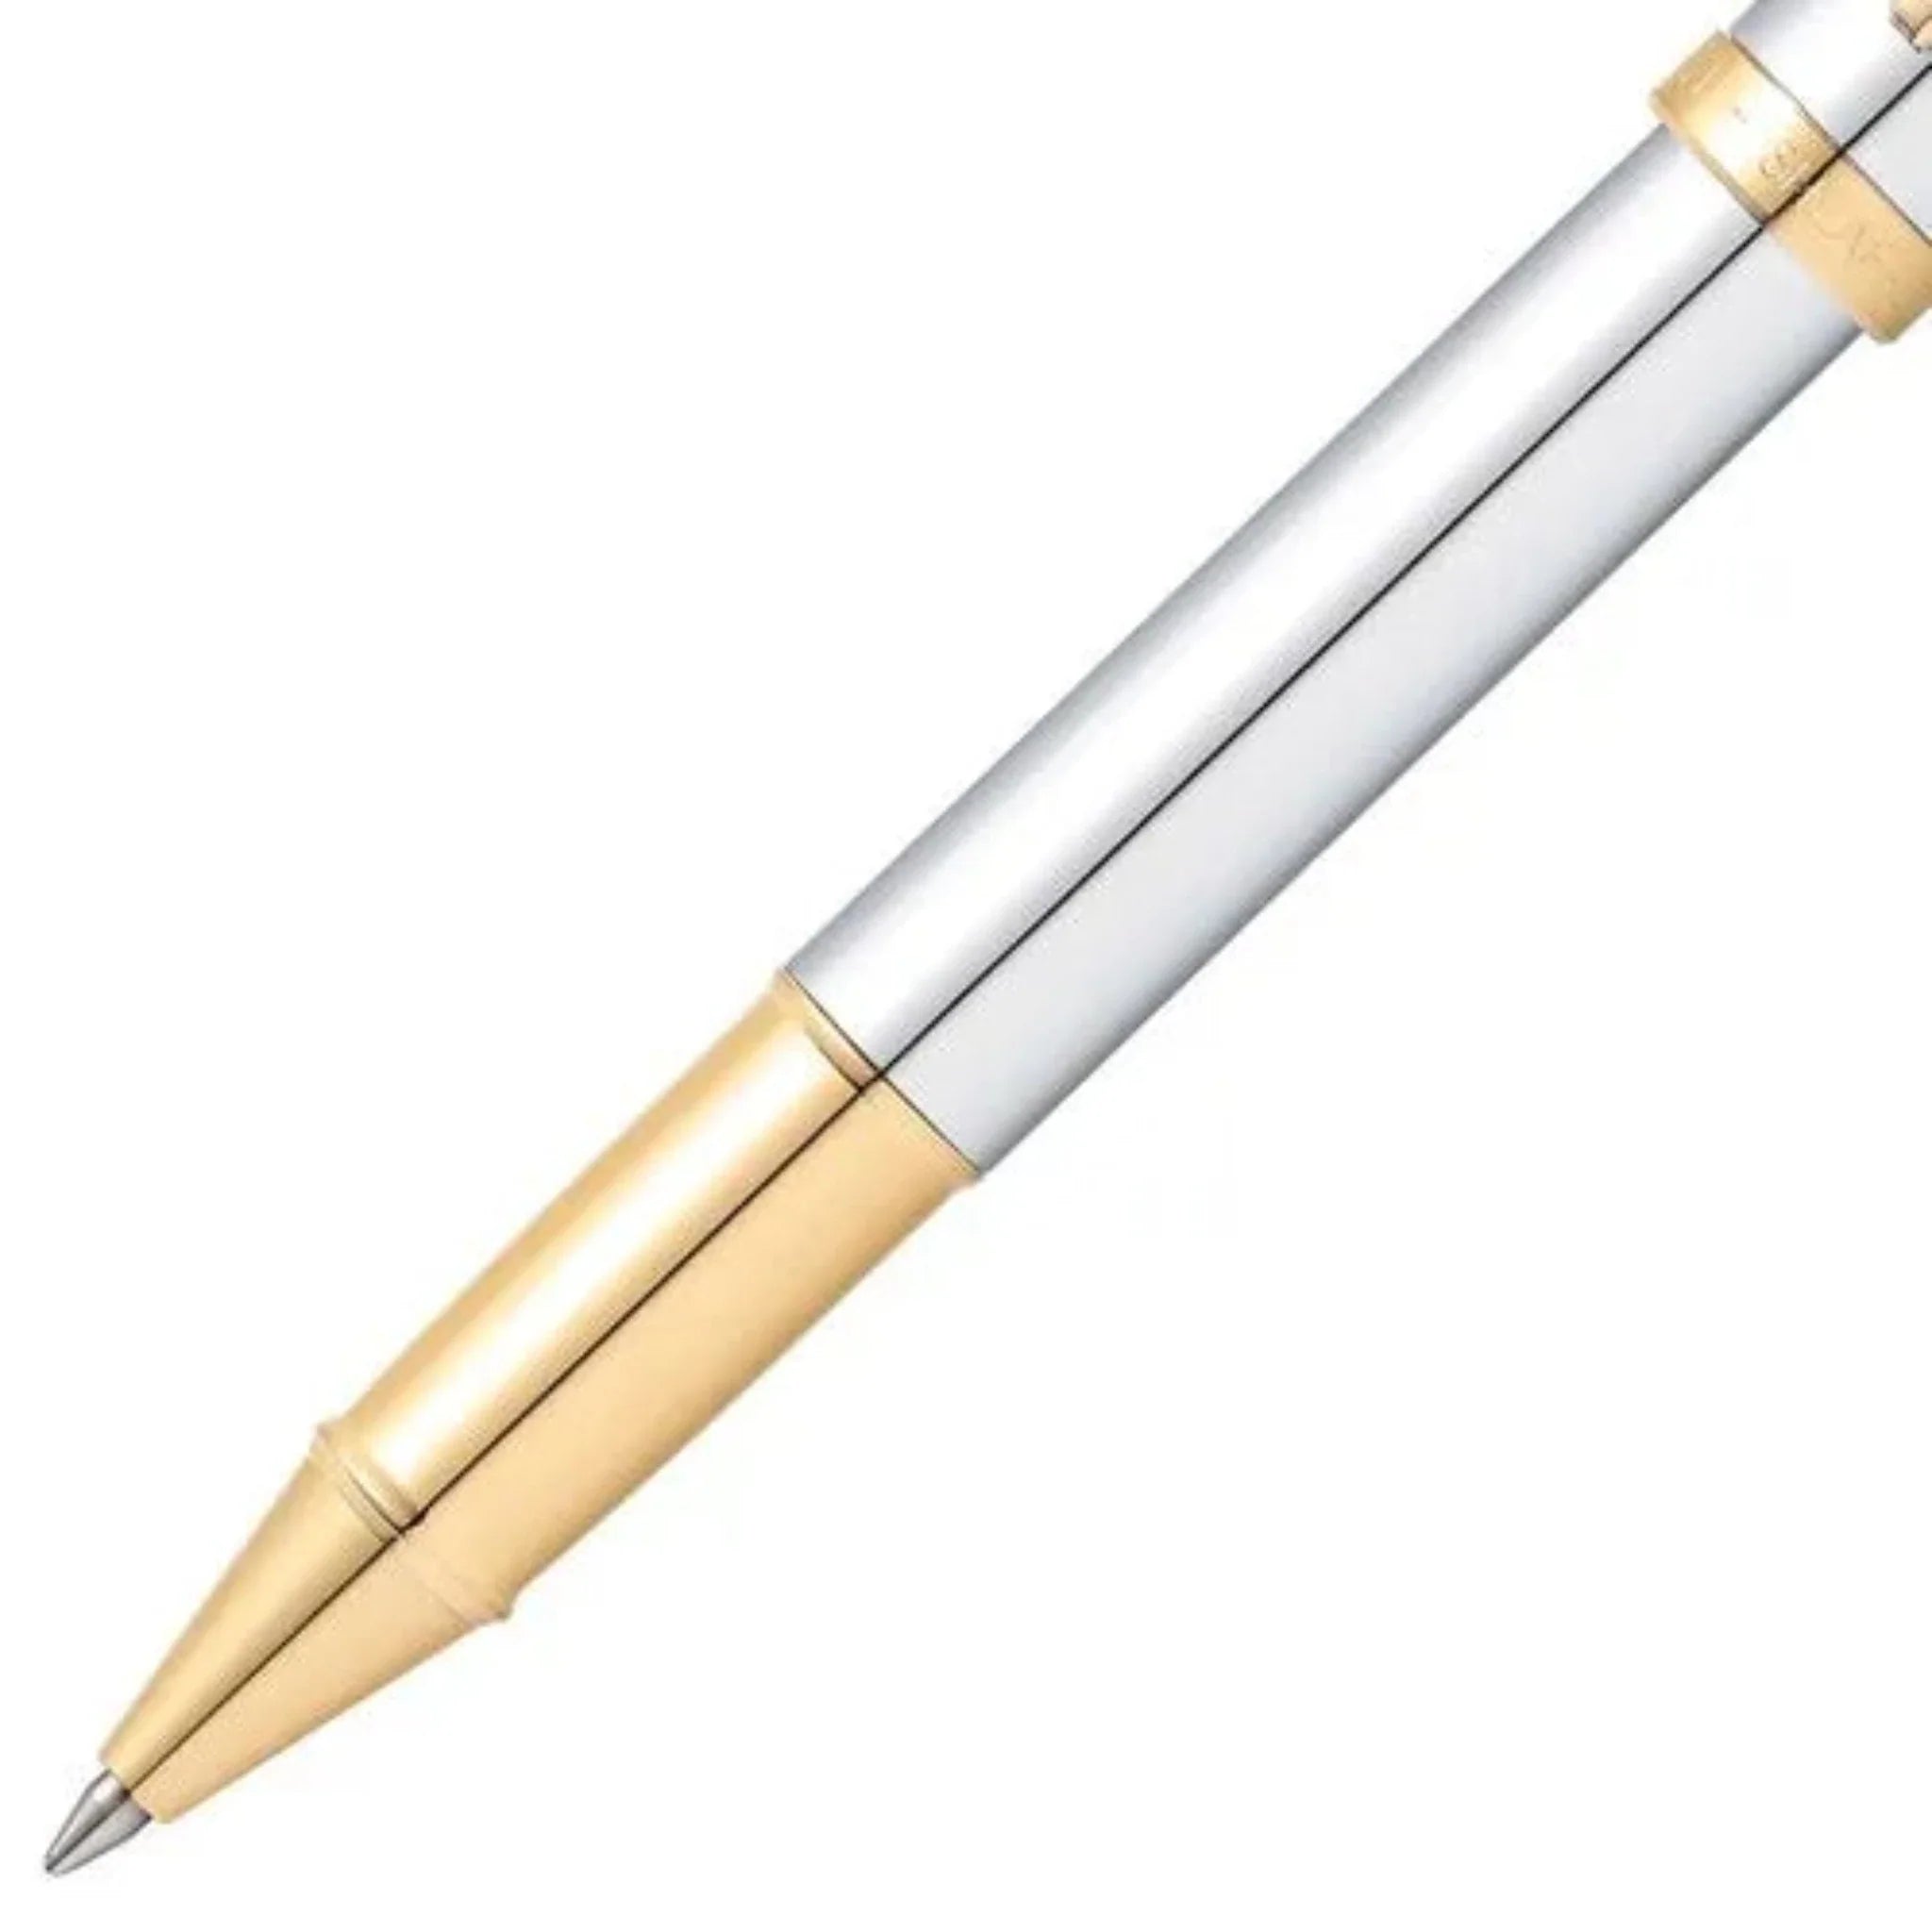 WP23910 -PEN SHEAFFER GIFT 100 A 9340 - BRIGHT CHROME WITH GOLD TONE TRIM RB